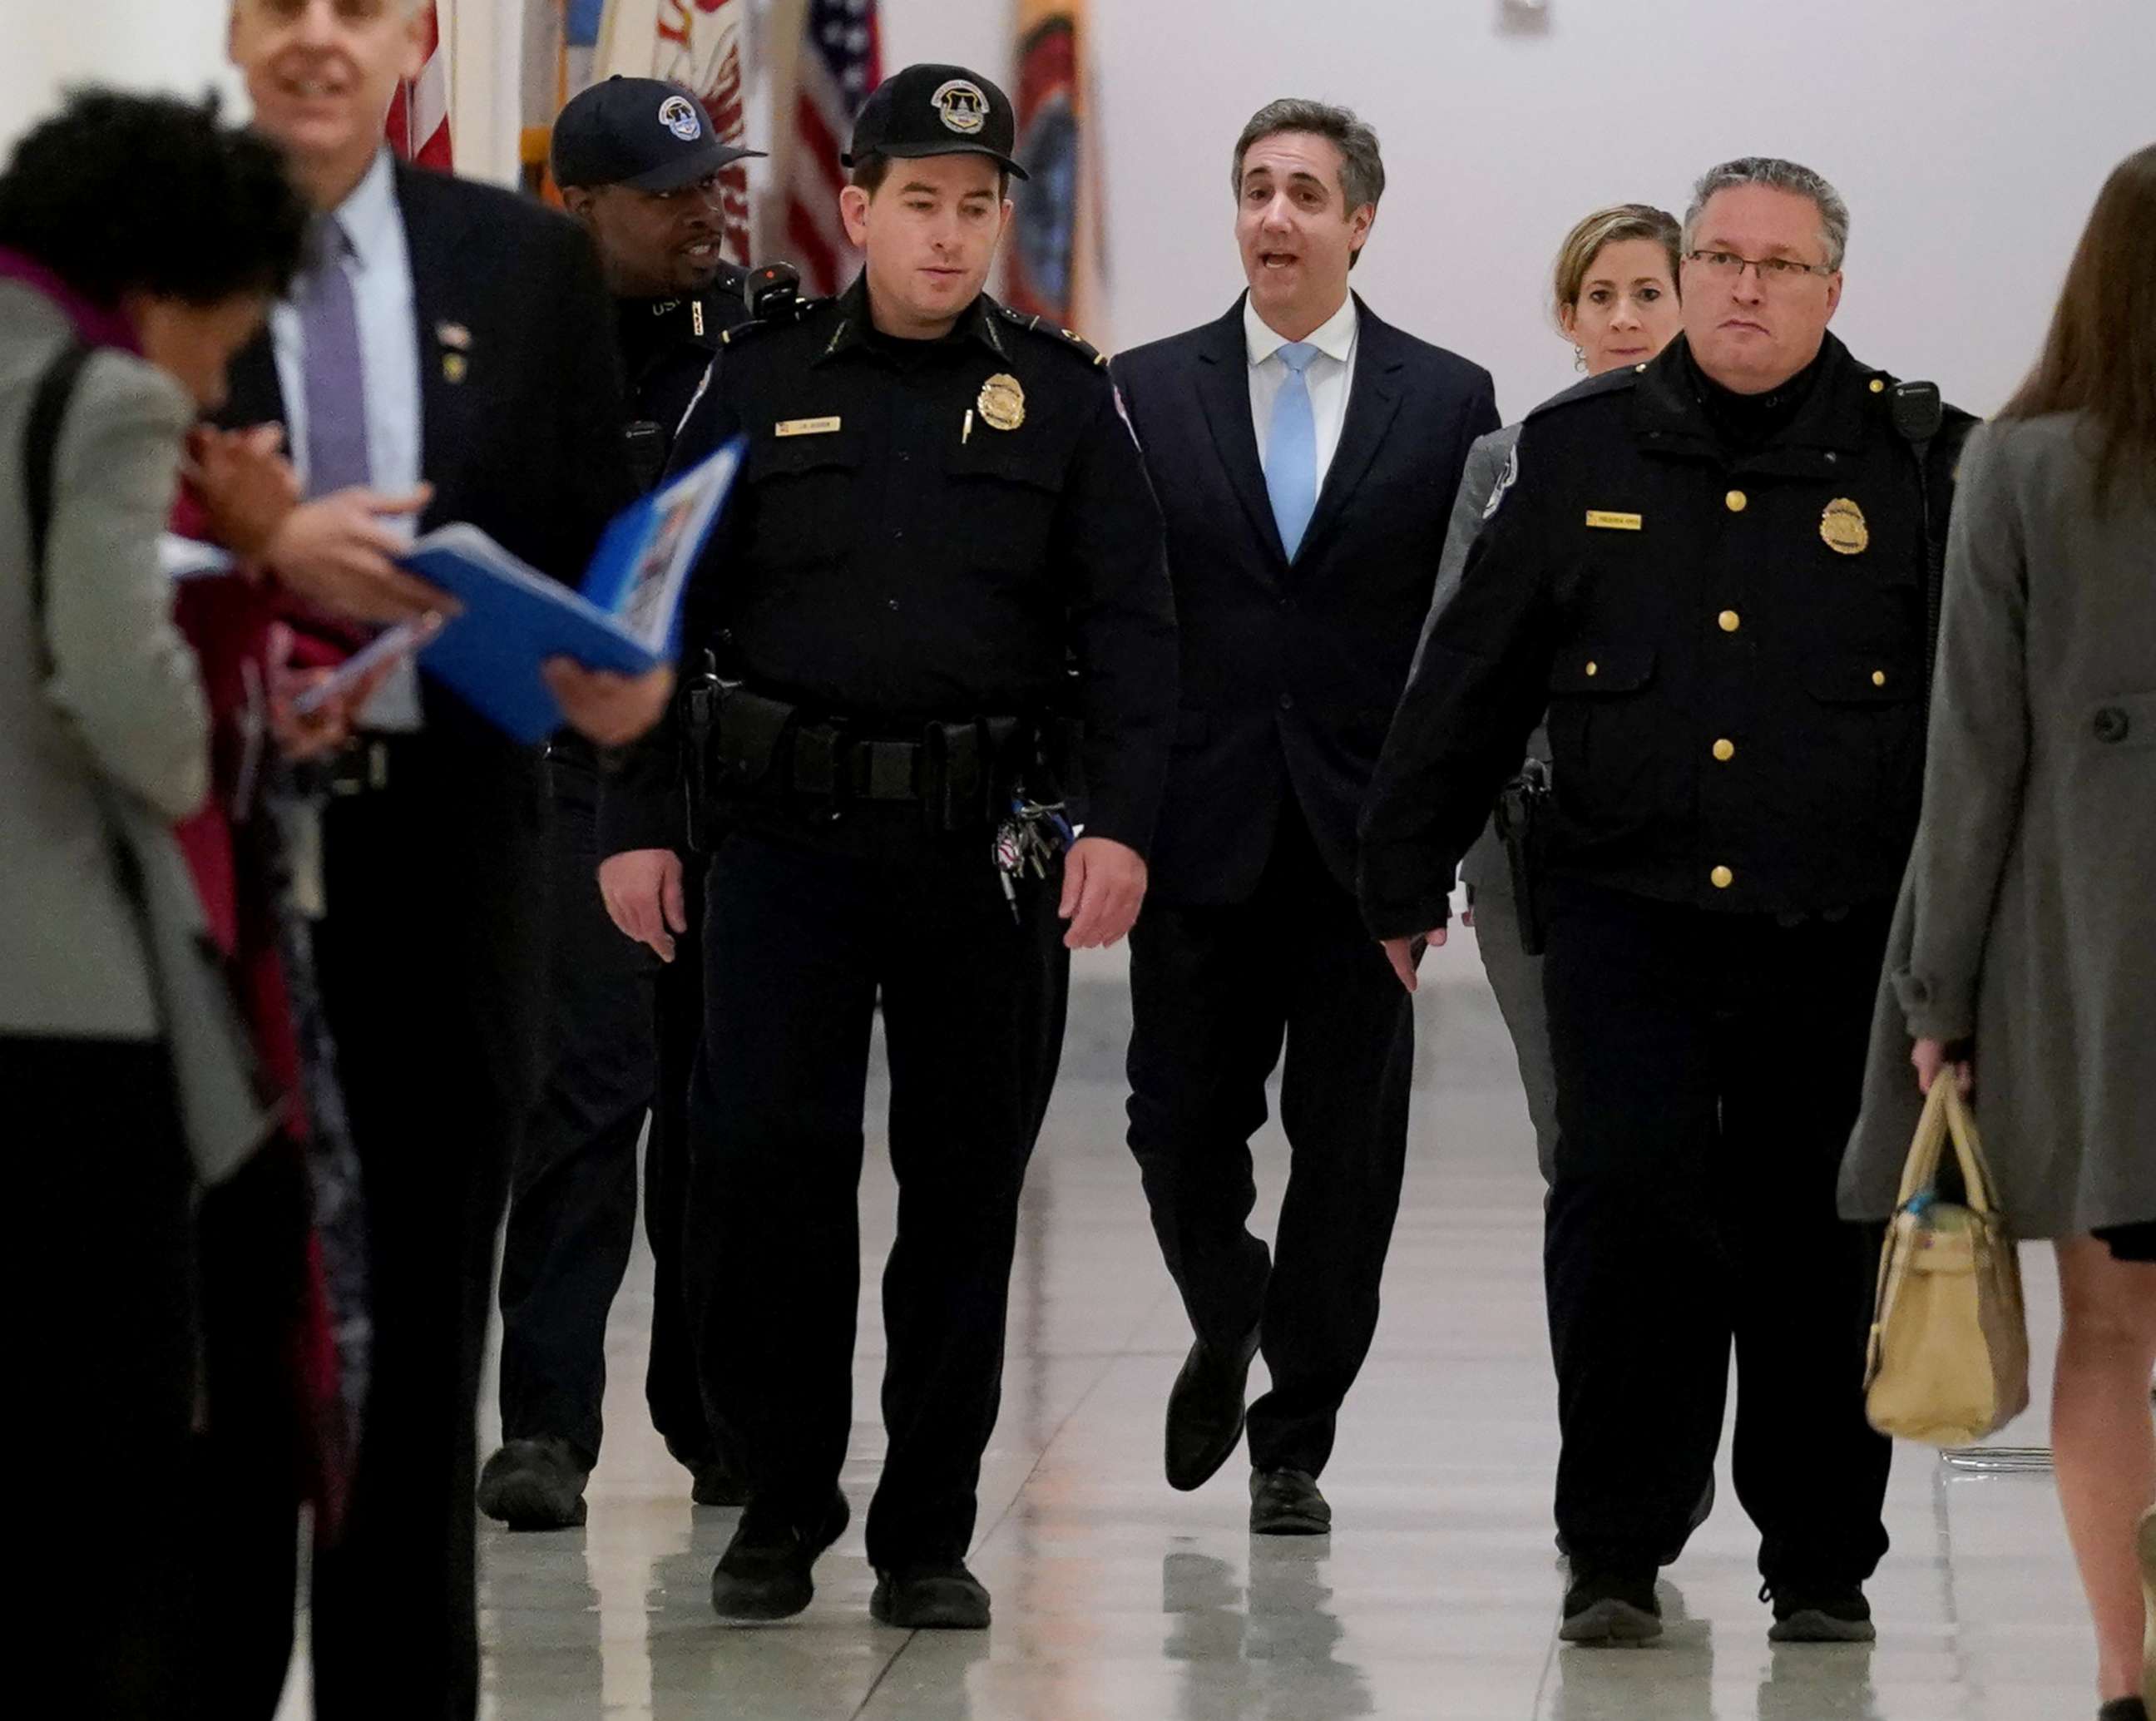 PHOTO: Michael Cohen, the former personal attorney of President Donald Trump, arrives to testify  before a House Committee on Oversight and Reform hearing on Capitol Hill in Washington, D.C., Feb. 27, 2019.